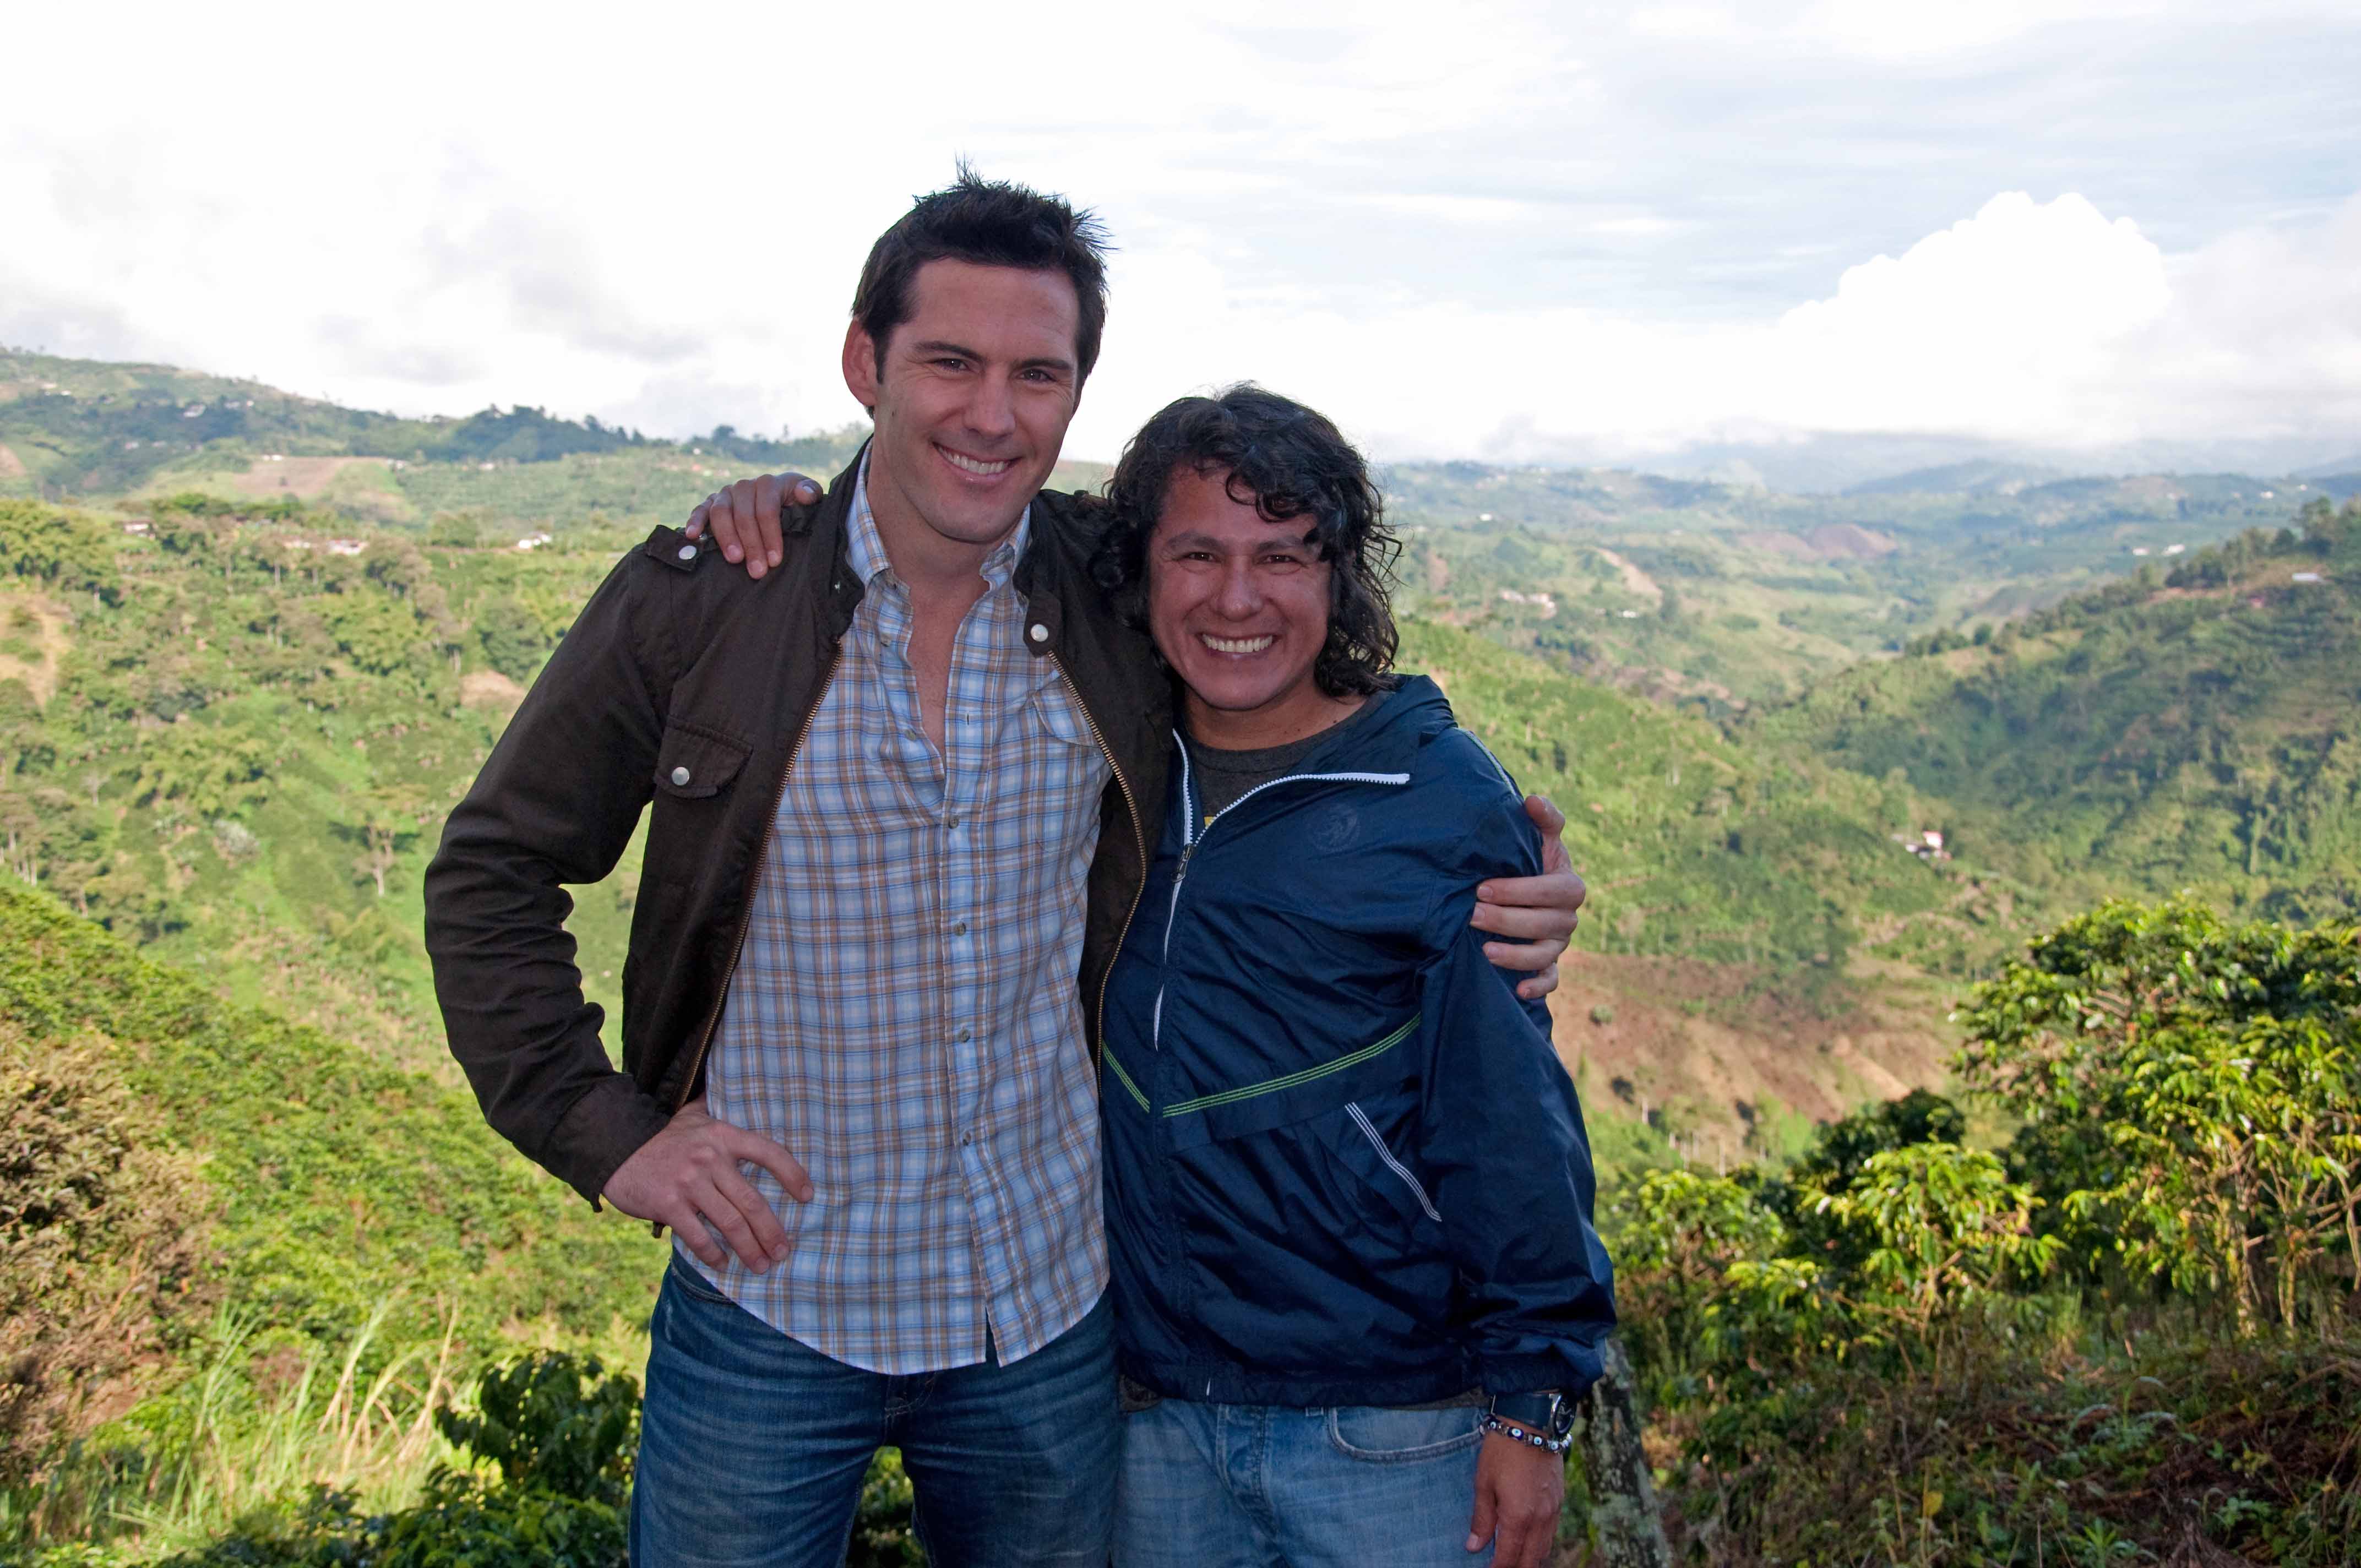 With director Herney Luna on location in Colombia for 